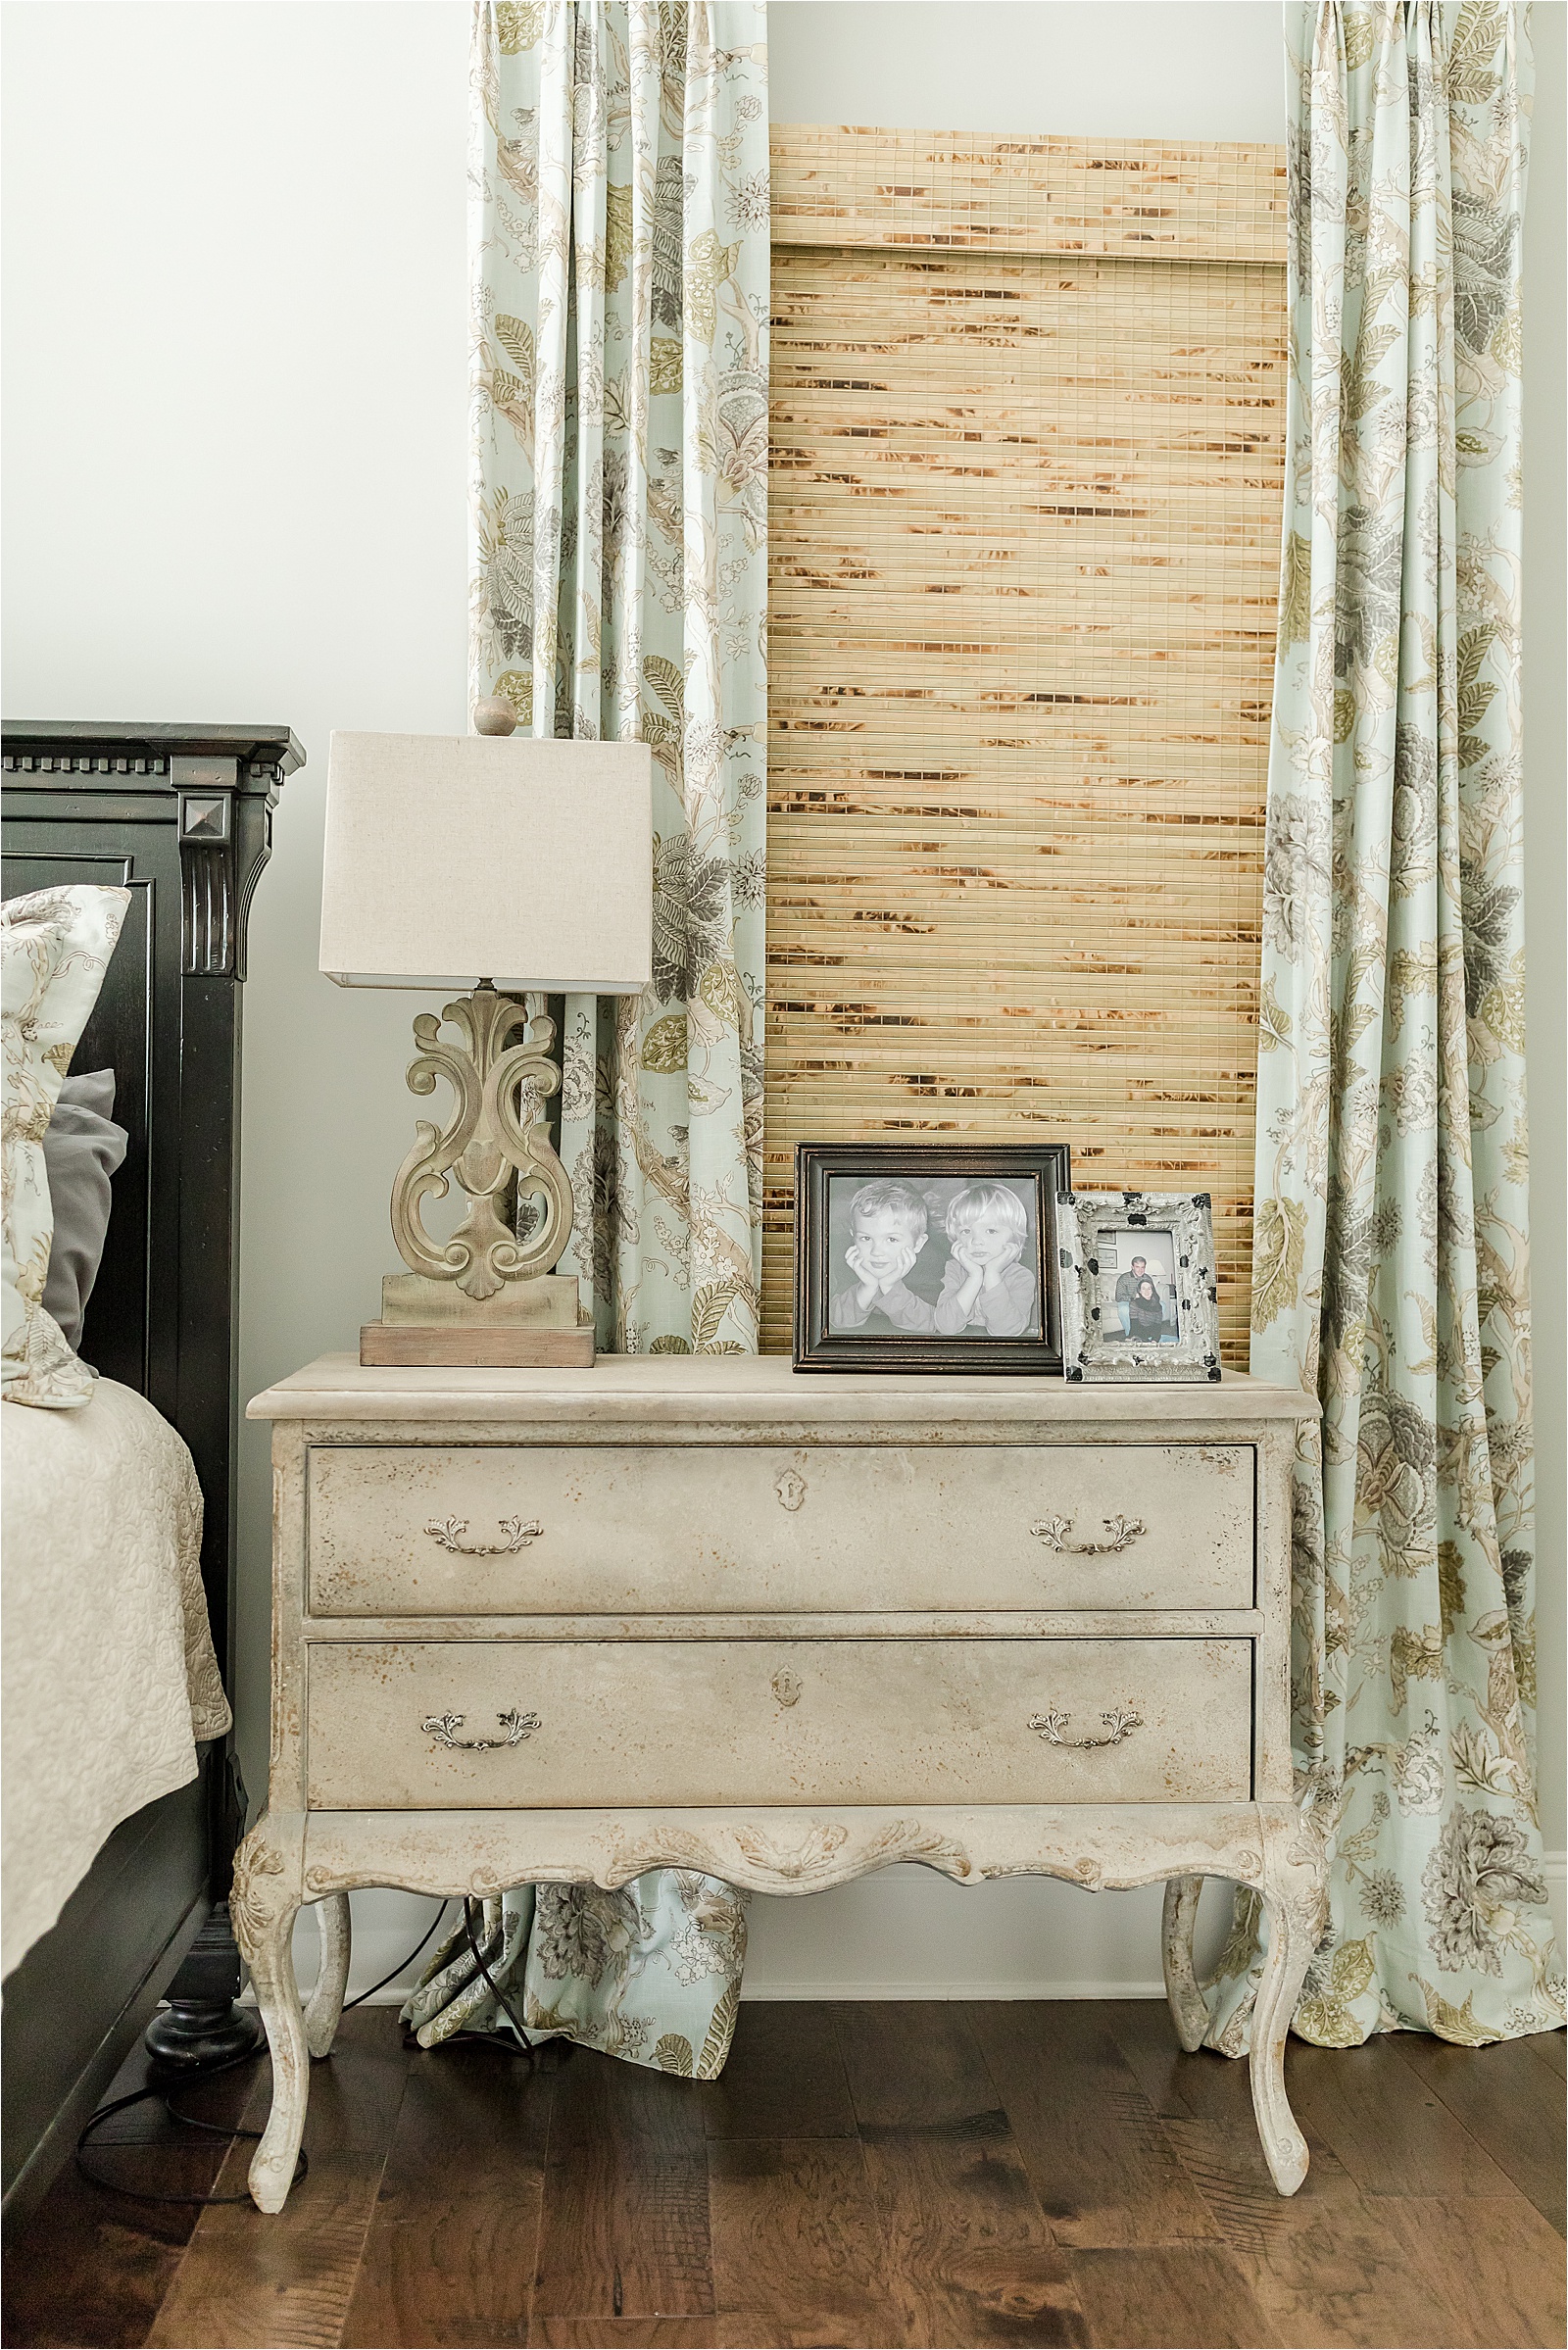 antiqued dresser being used as a nightstand